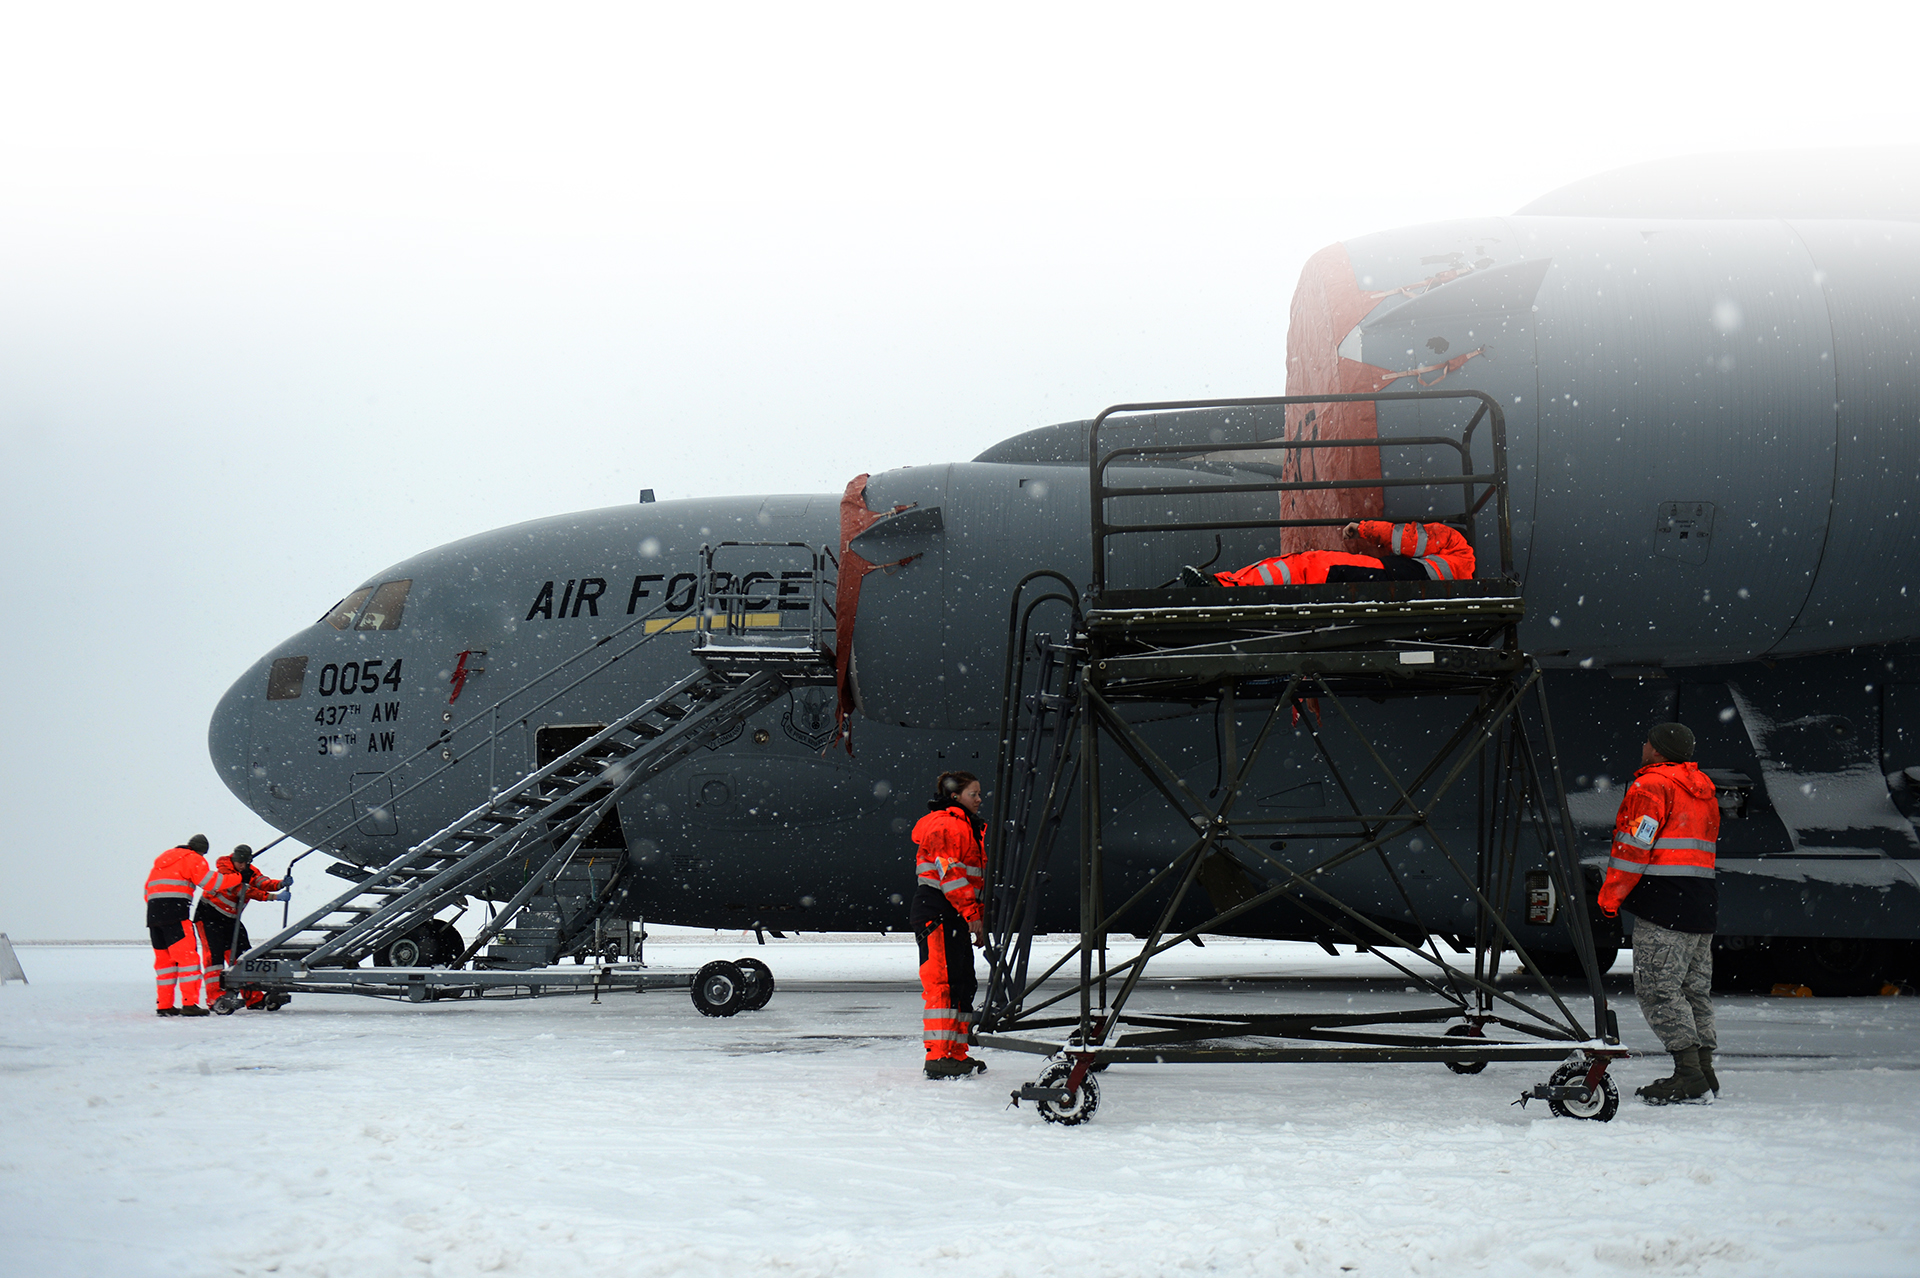 U.S._Airmen_with_the_726th_Air_Mobility_Squadron_secure_engine_covers_on_a_C-17_Globemaster_III_aircraft_during_snow_at_Spangdahlem_Air_Base,_Germany_130115-F-VI983-150